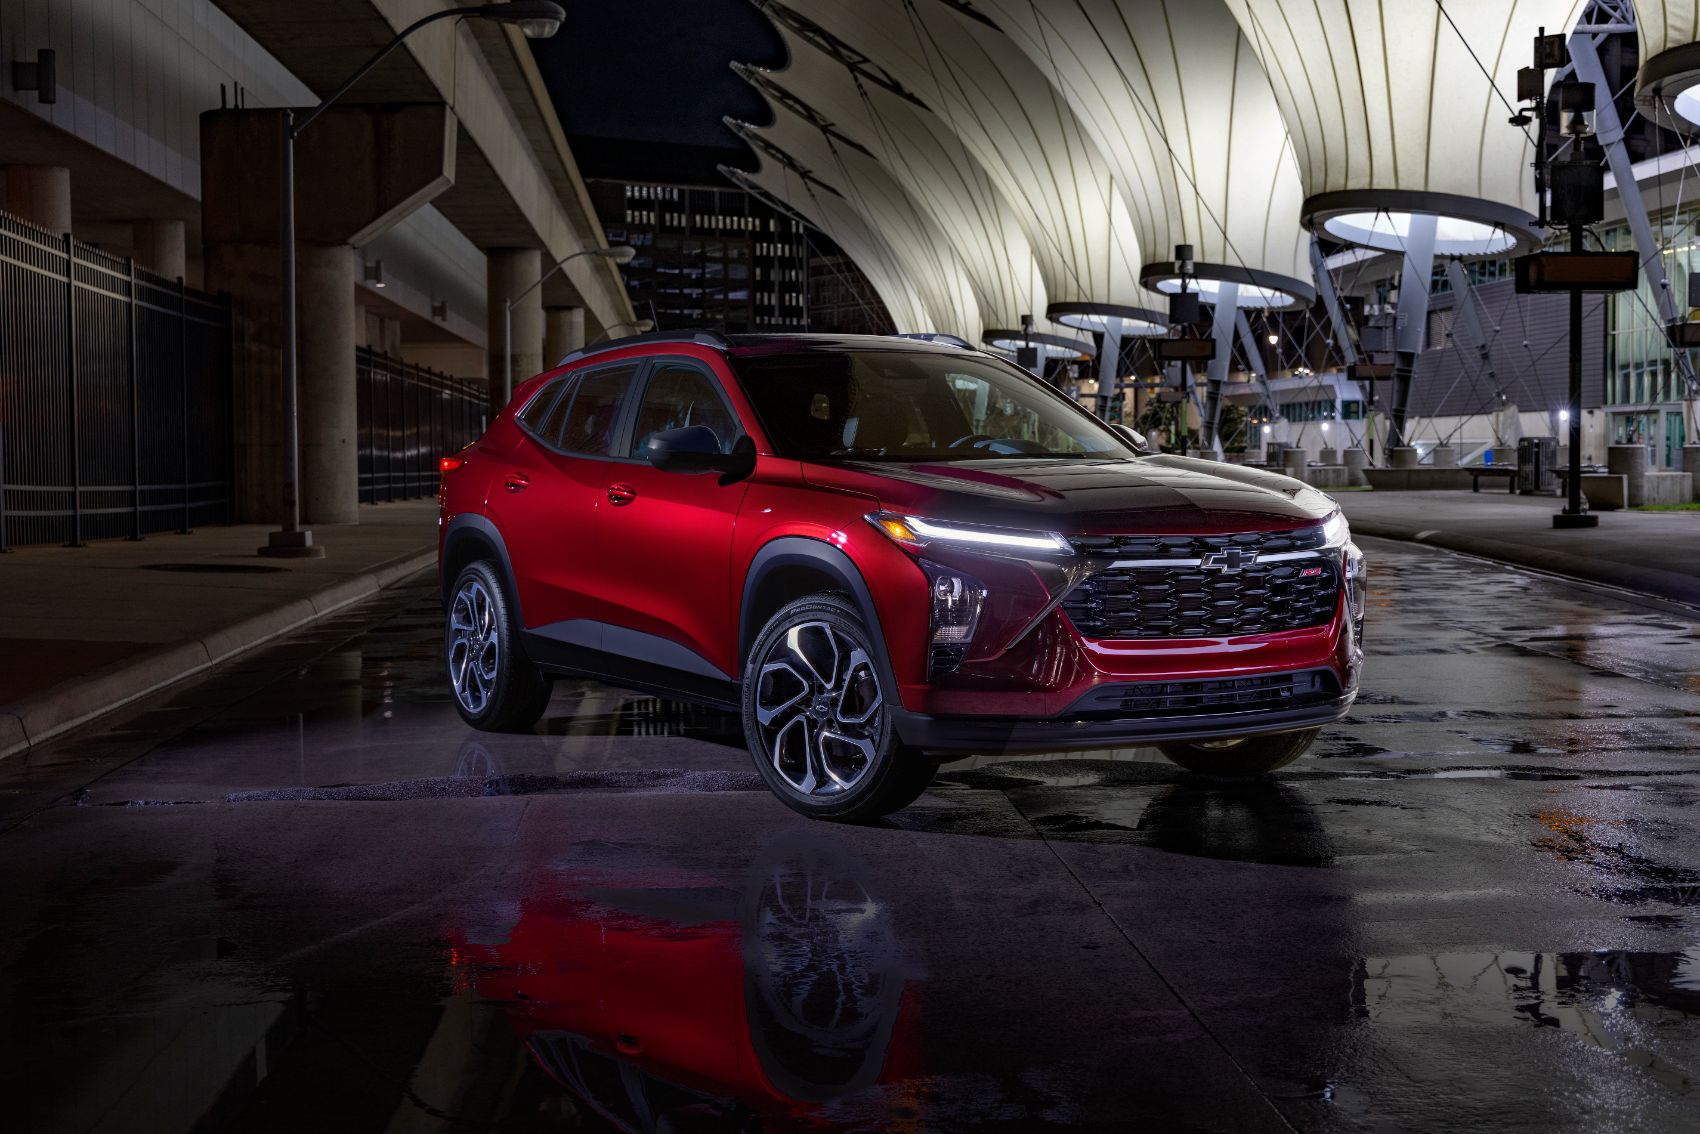 Entry-Level Crossover Benefits From Extensive Redesign